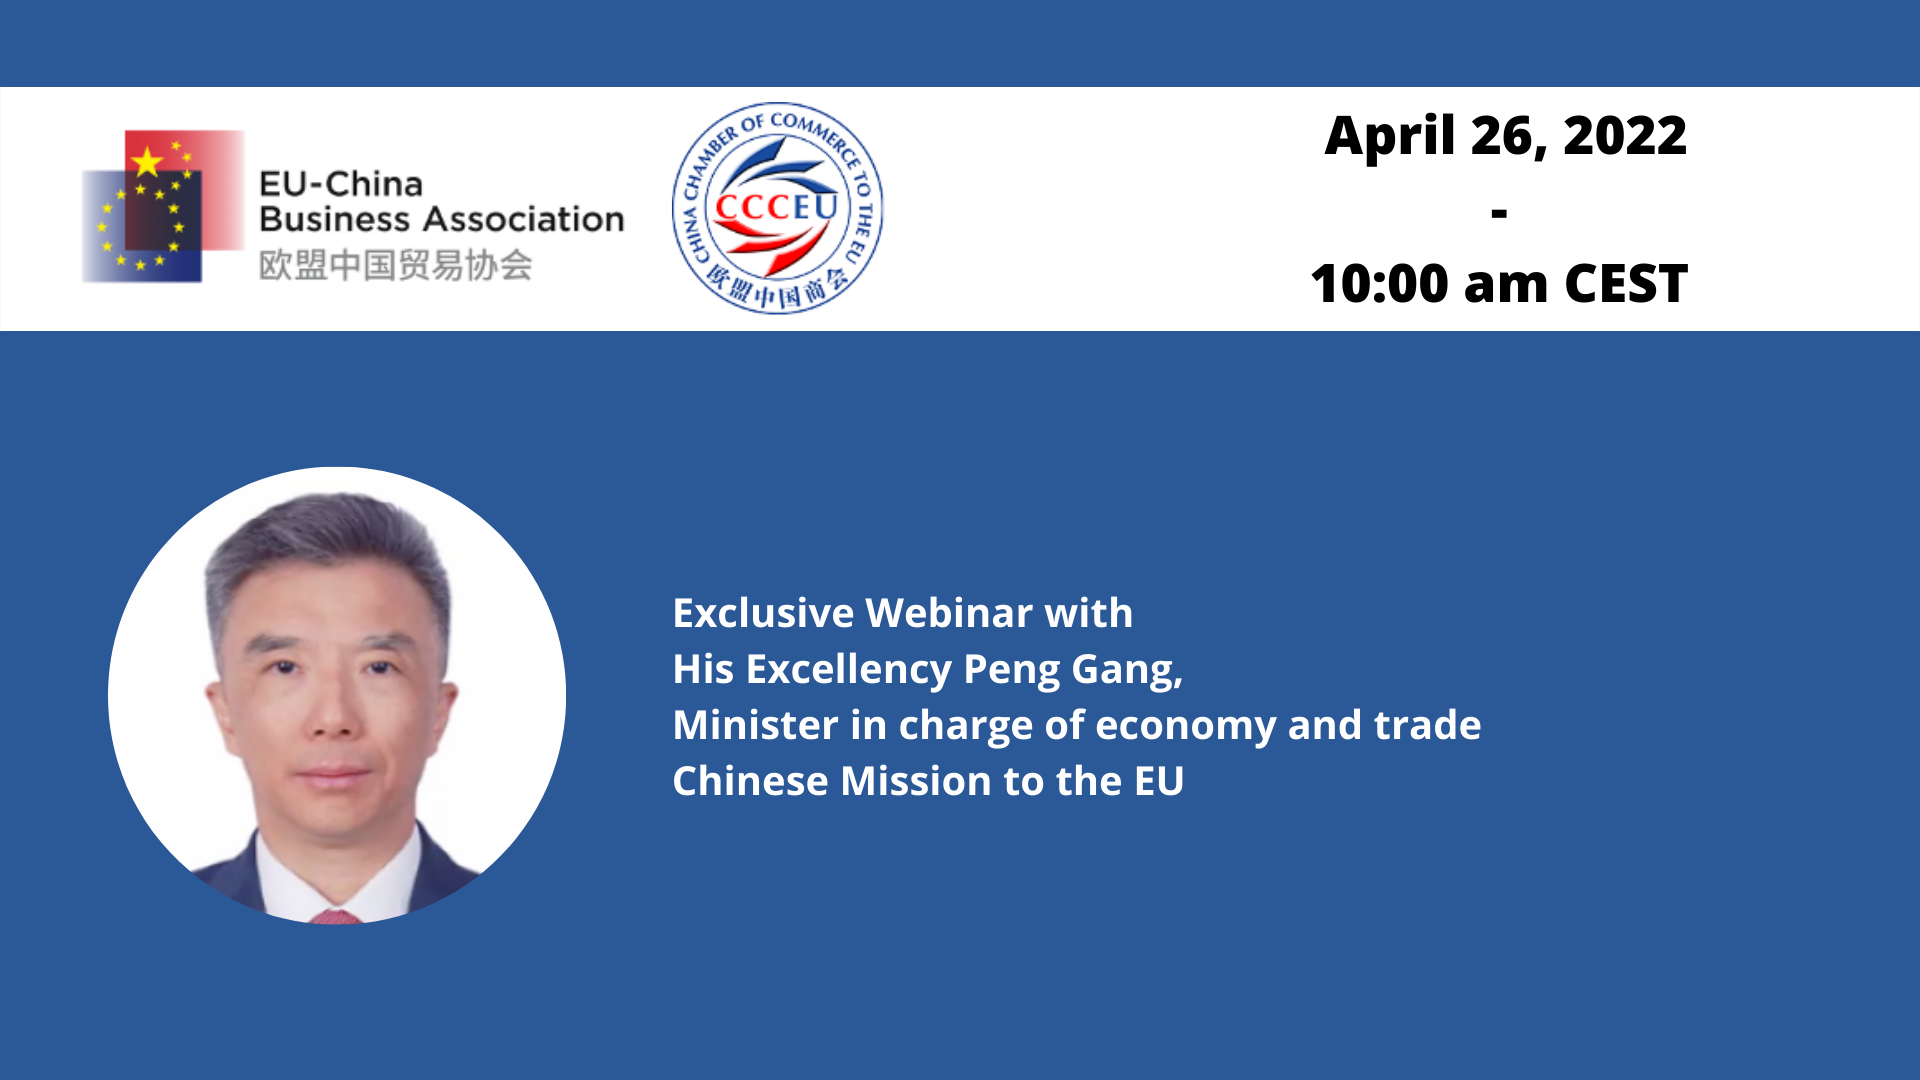 Exclusive Webinar with HE Peng Gang, Minister in charge of economy and commerce - Chinese Mission to the EU